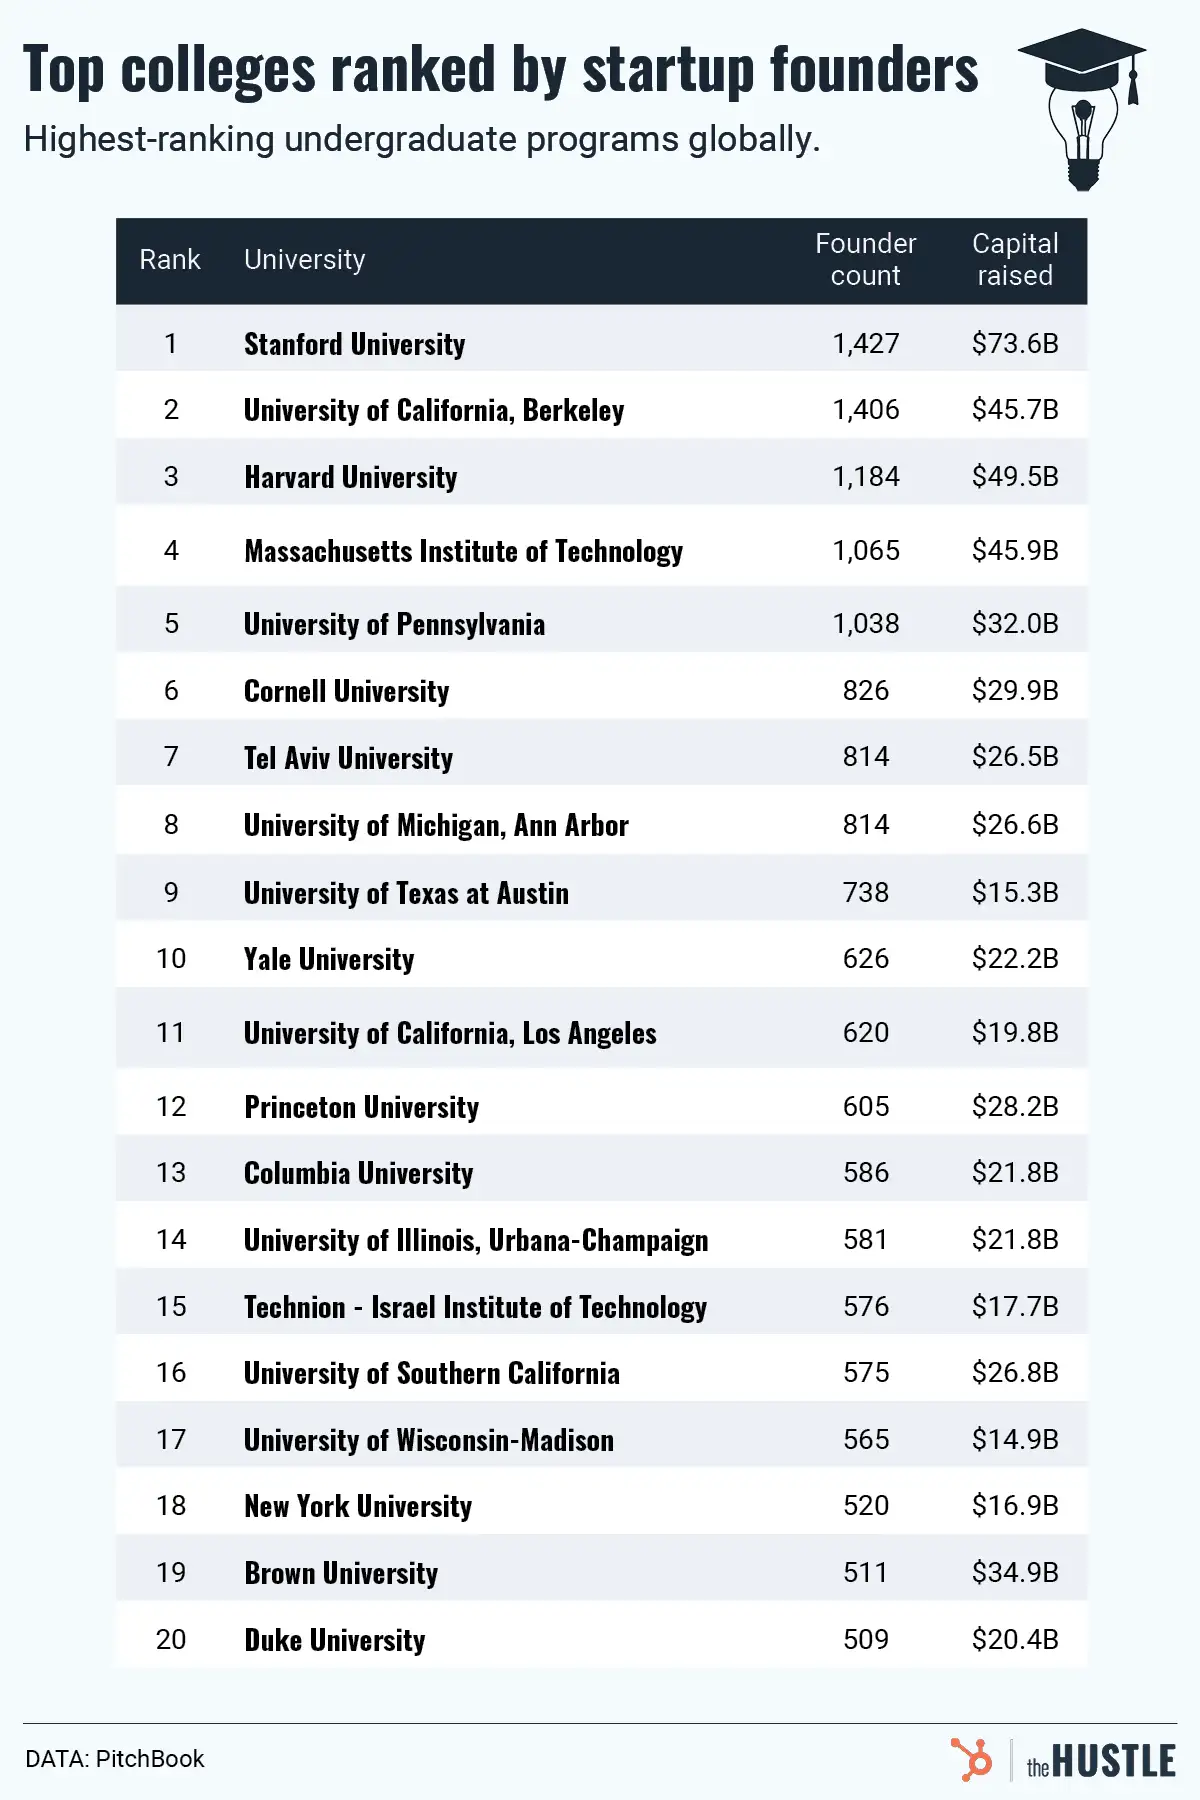 Which schools pump out the most founders?